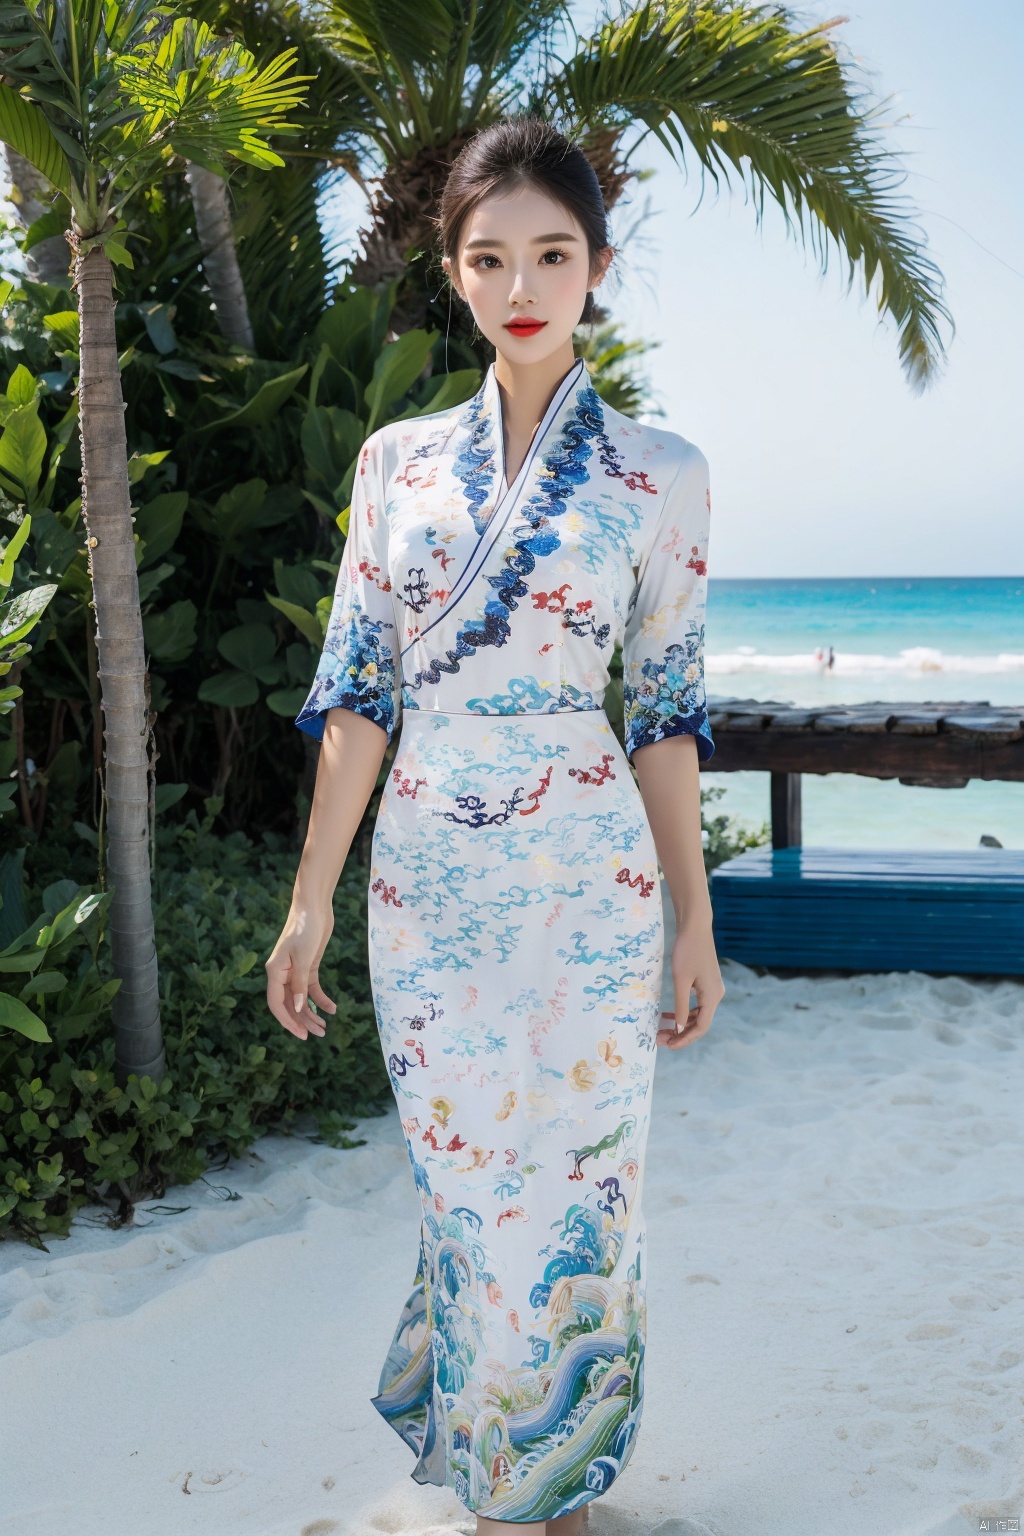  A beach vacation concept, with a model in a tropical resort setting, wearing a stylish swimsuit and a flowing beach cover-up. The backdrop includes palm trees, sandy beaches, and a clear blue sky, creating a sense of relaxation and luxury., china dress\(haihang\), greendesign, Ink painting, flowing skirts,Giant flowers,